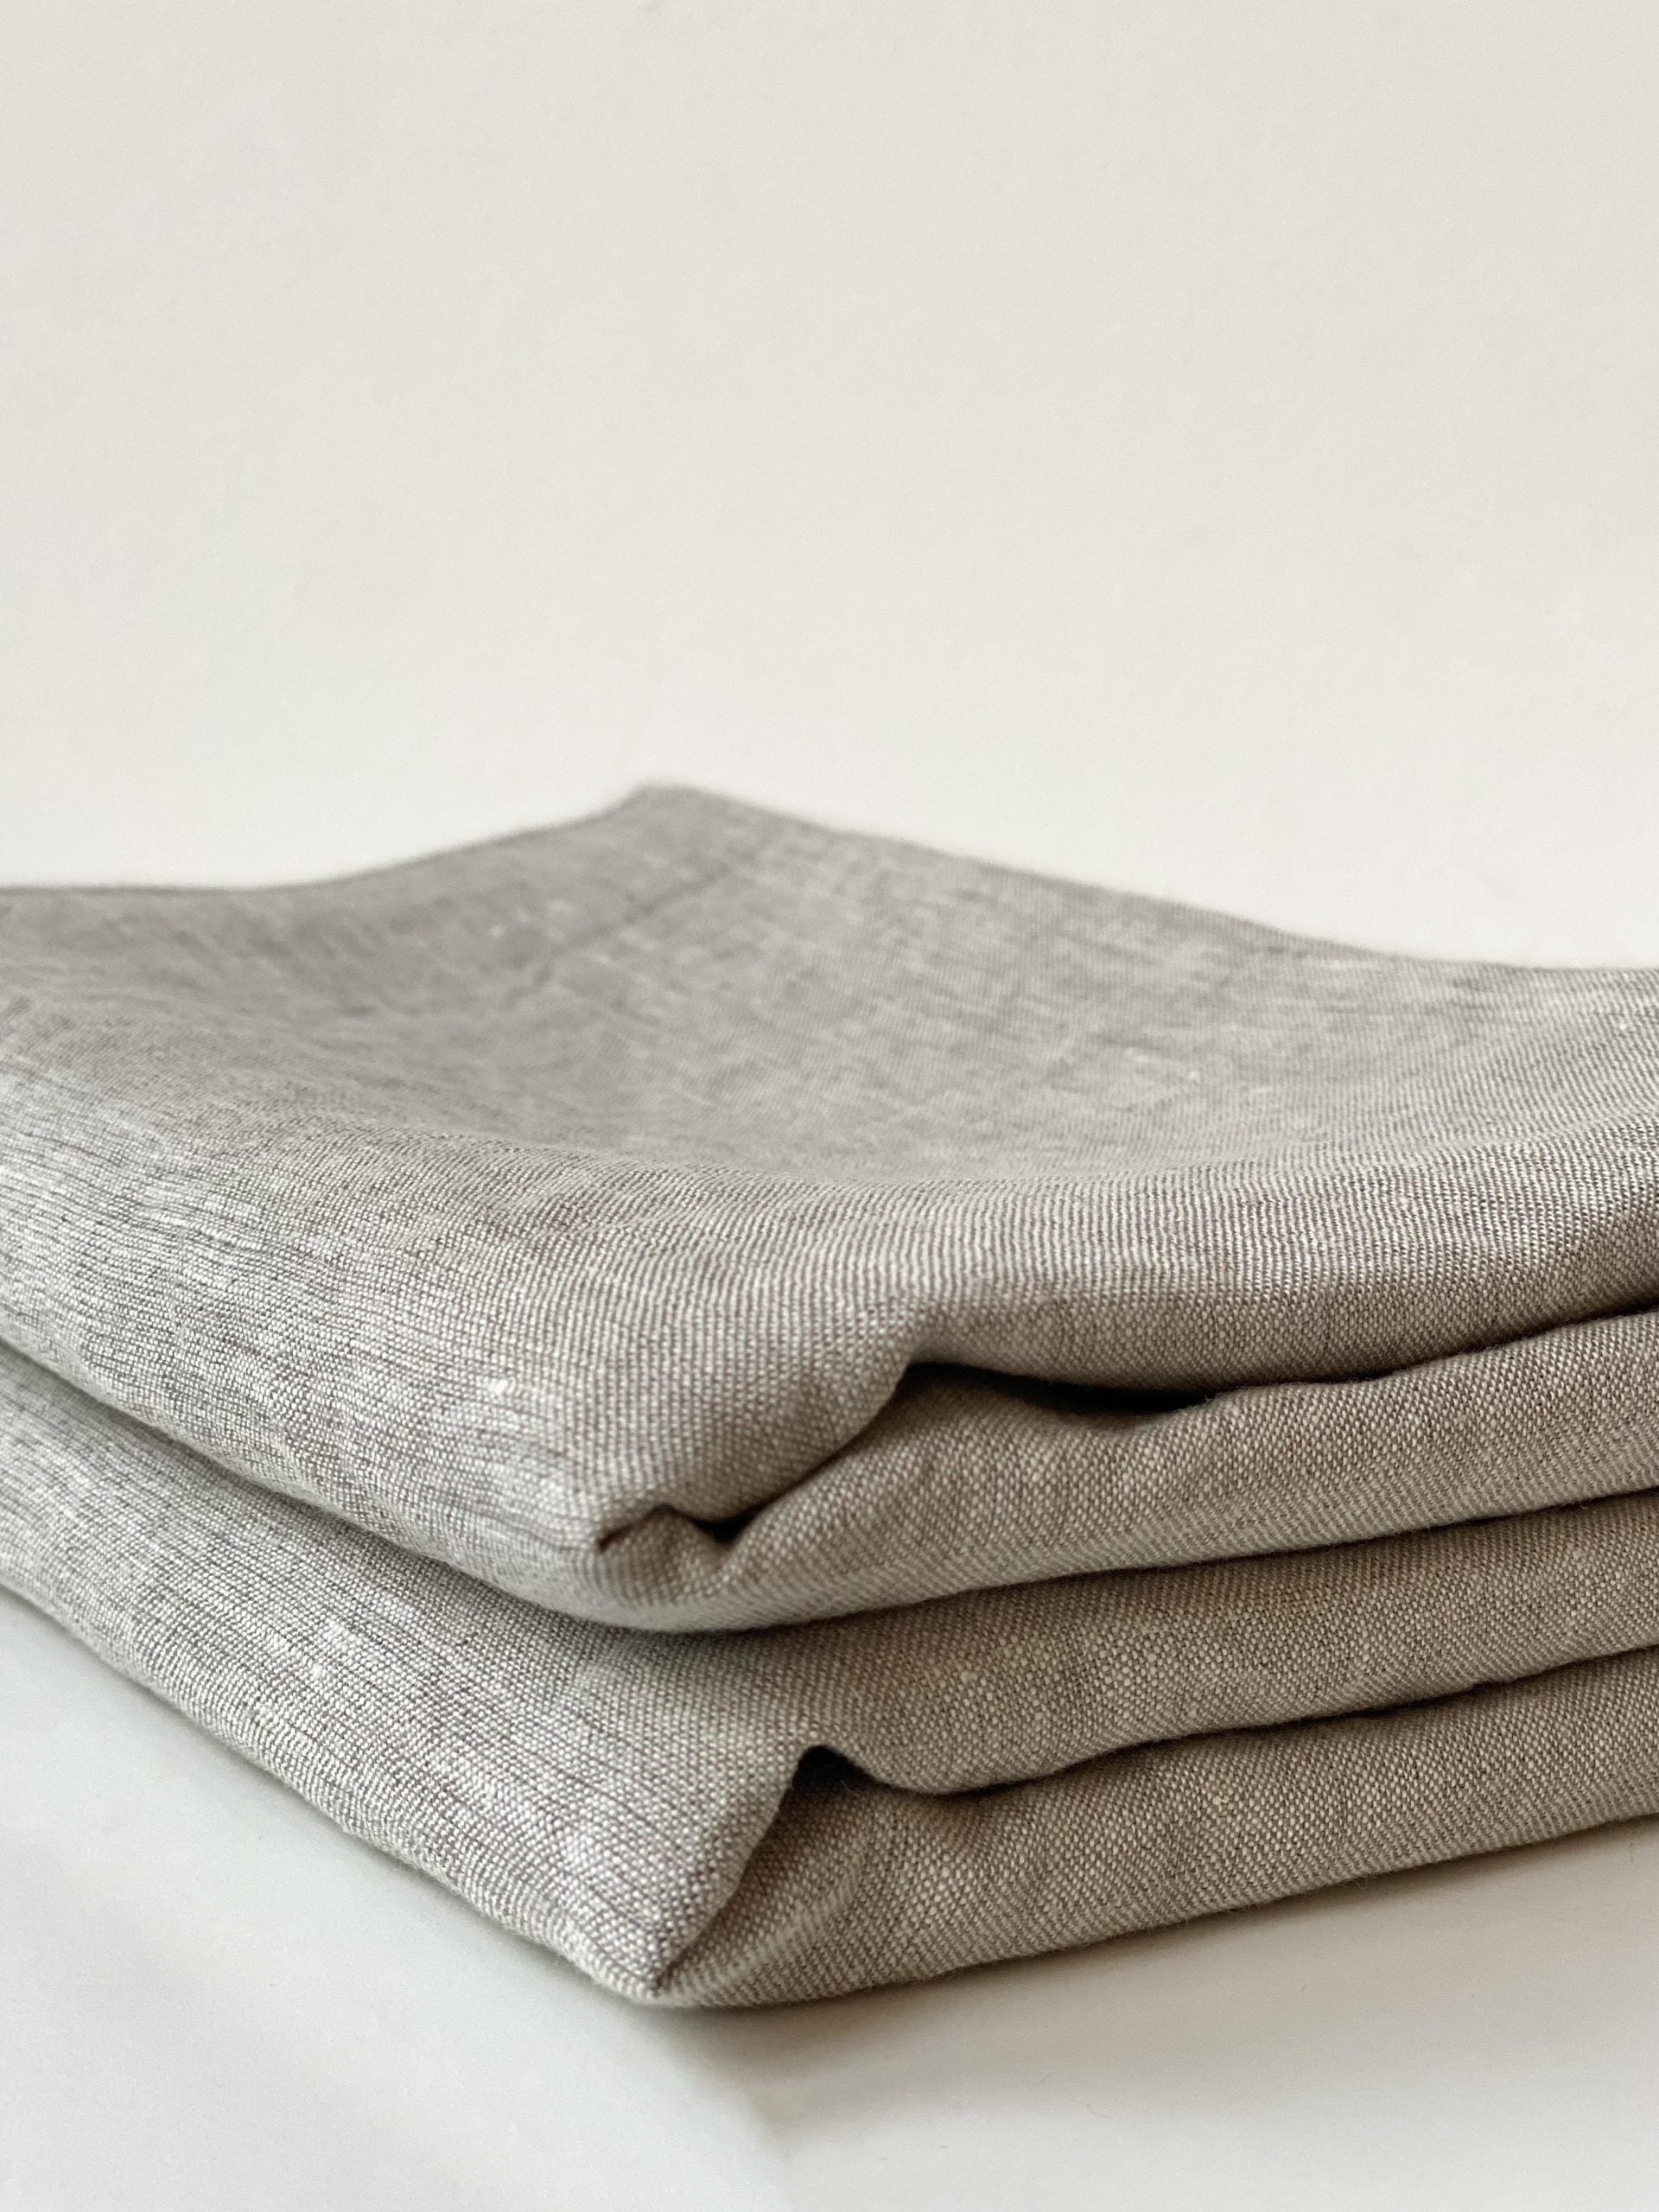 Linen pillowcases beige (plain or with ruffle)